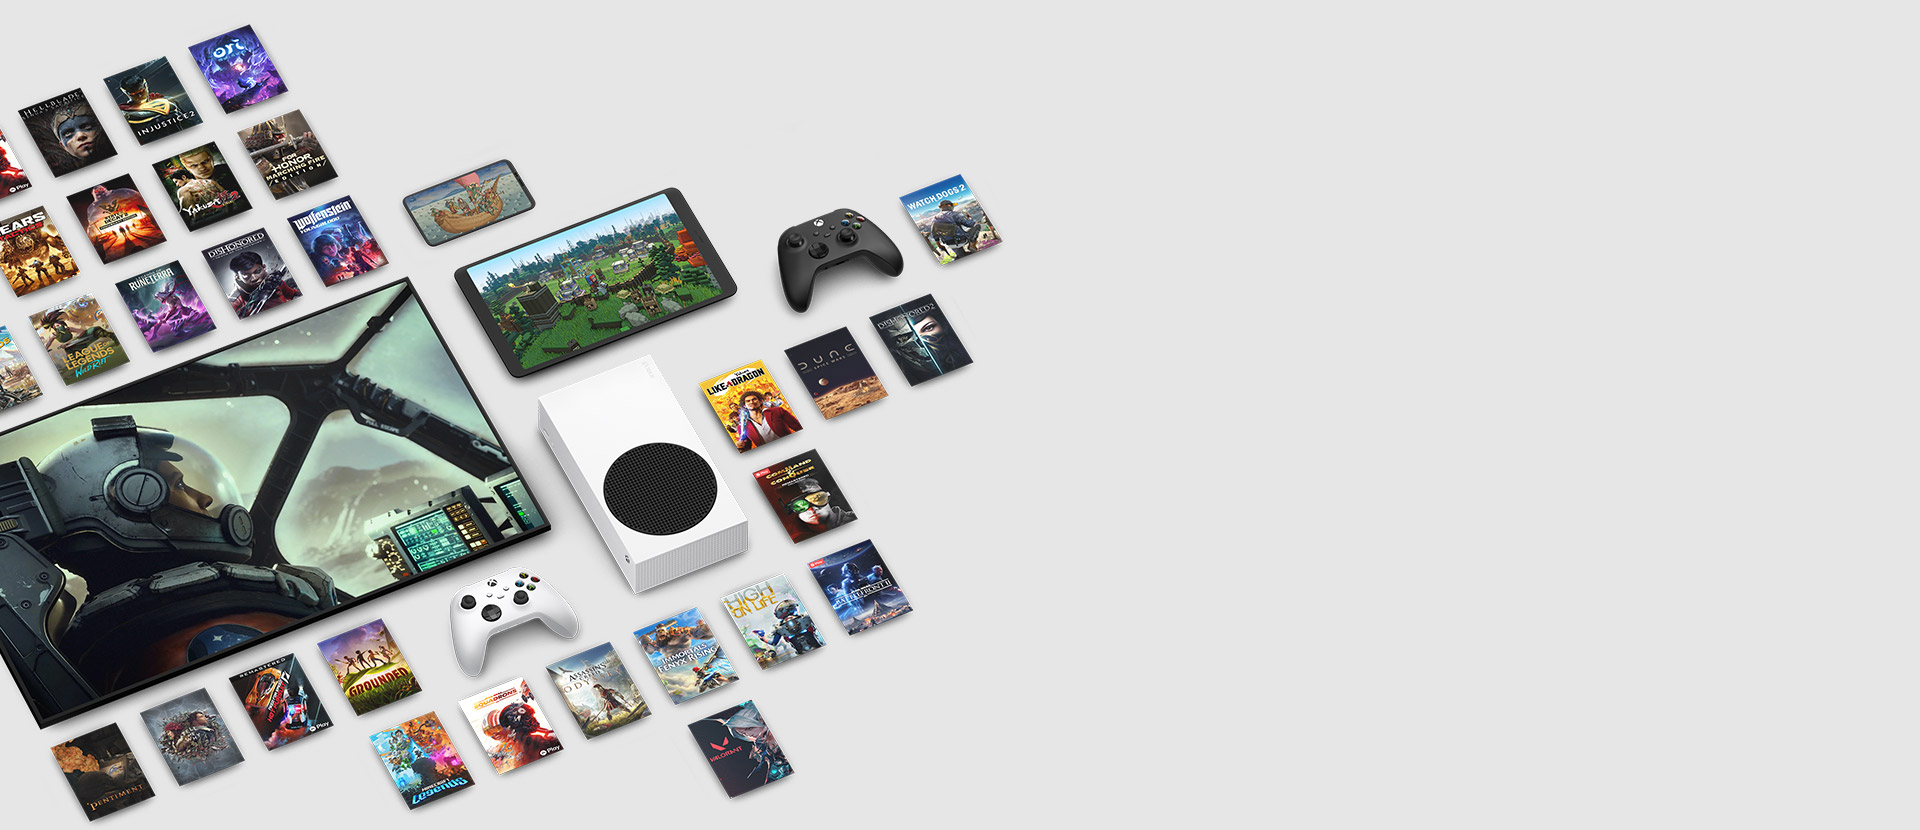 Game art from multiple games available now with Xbox Game Pass Ultimate surround multiple devices, including a console, mobile phone, tablet, smart TV, and controllers.